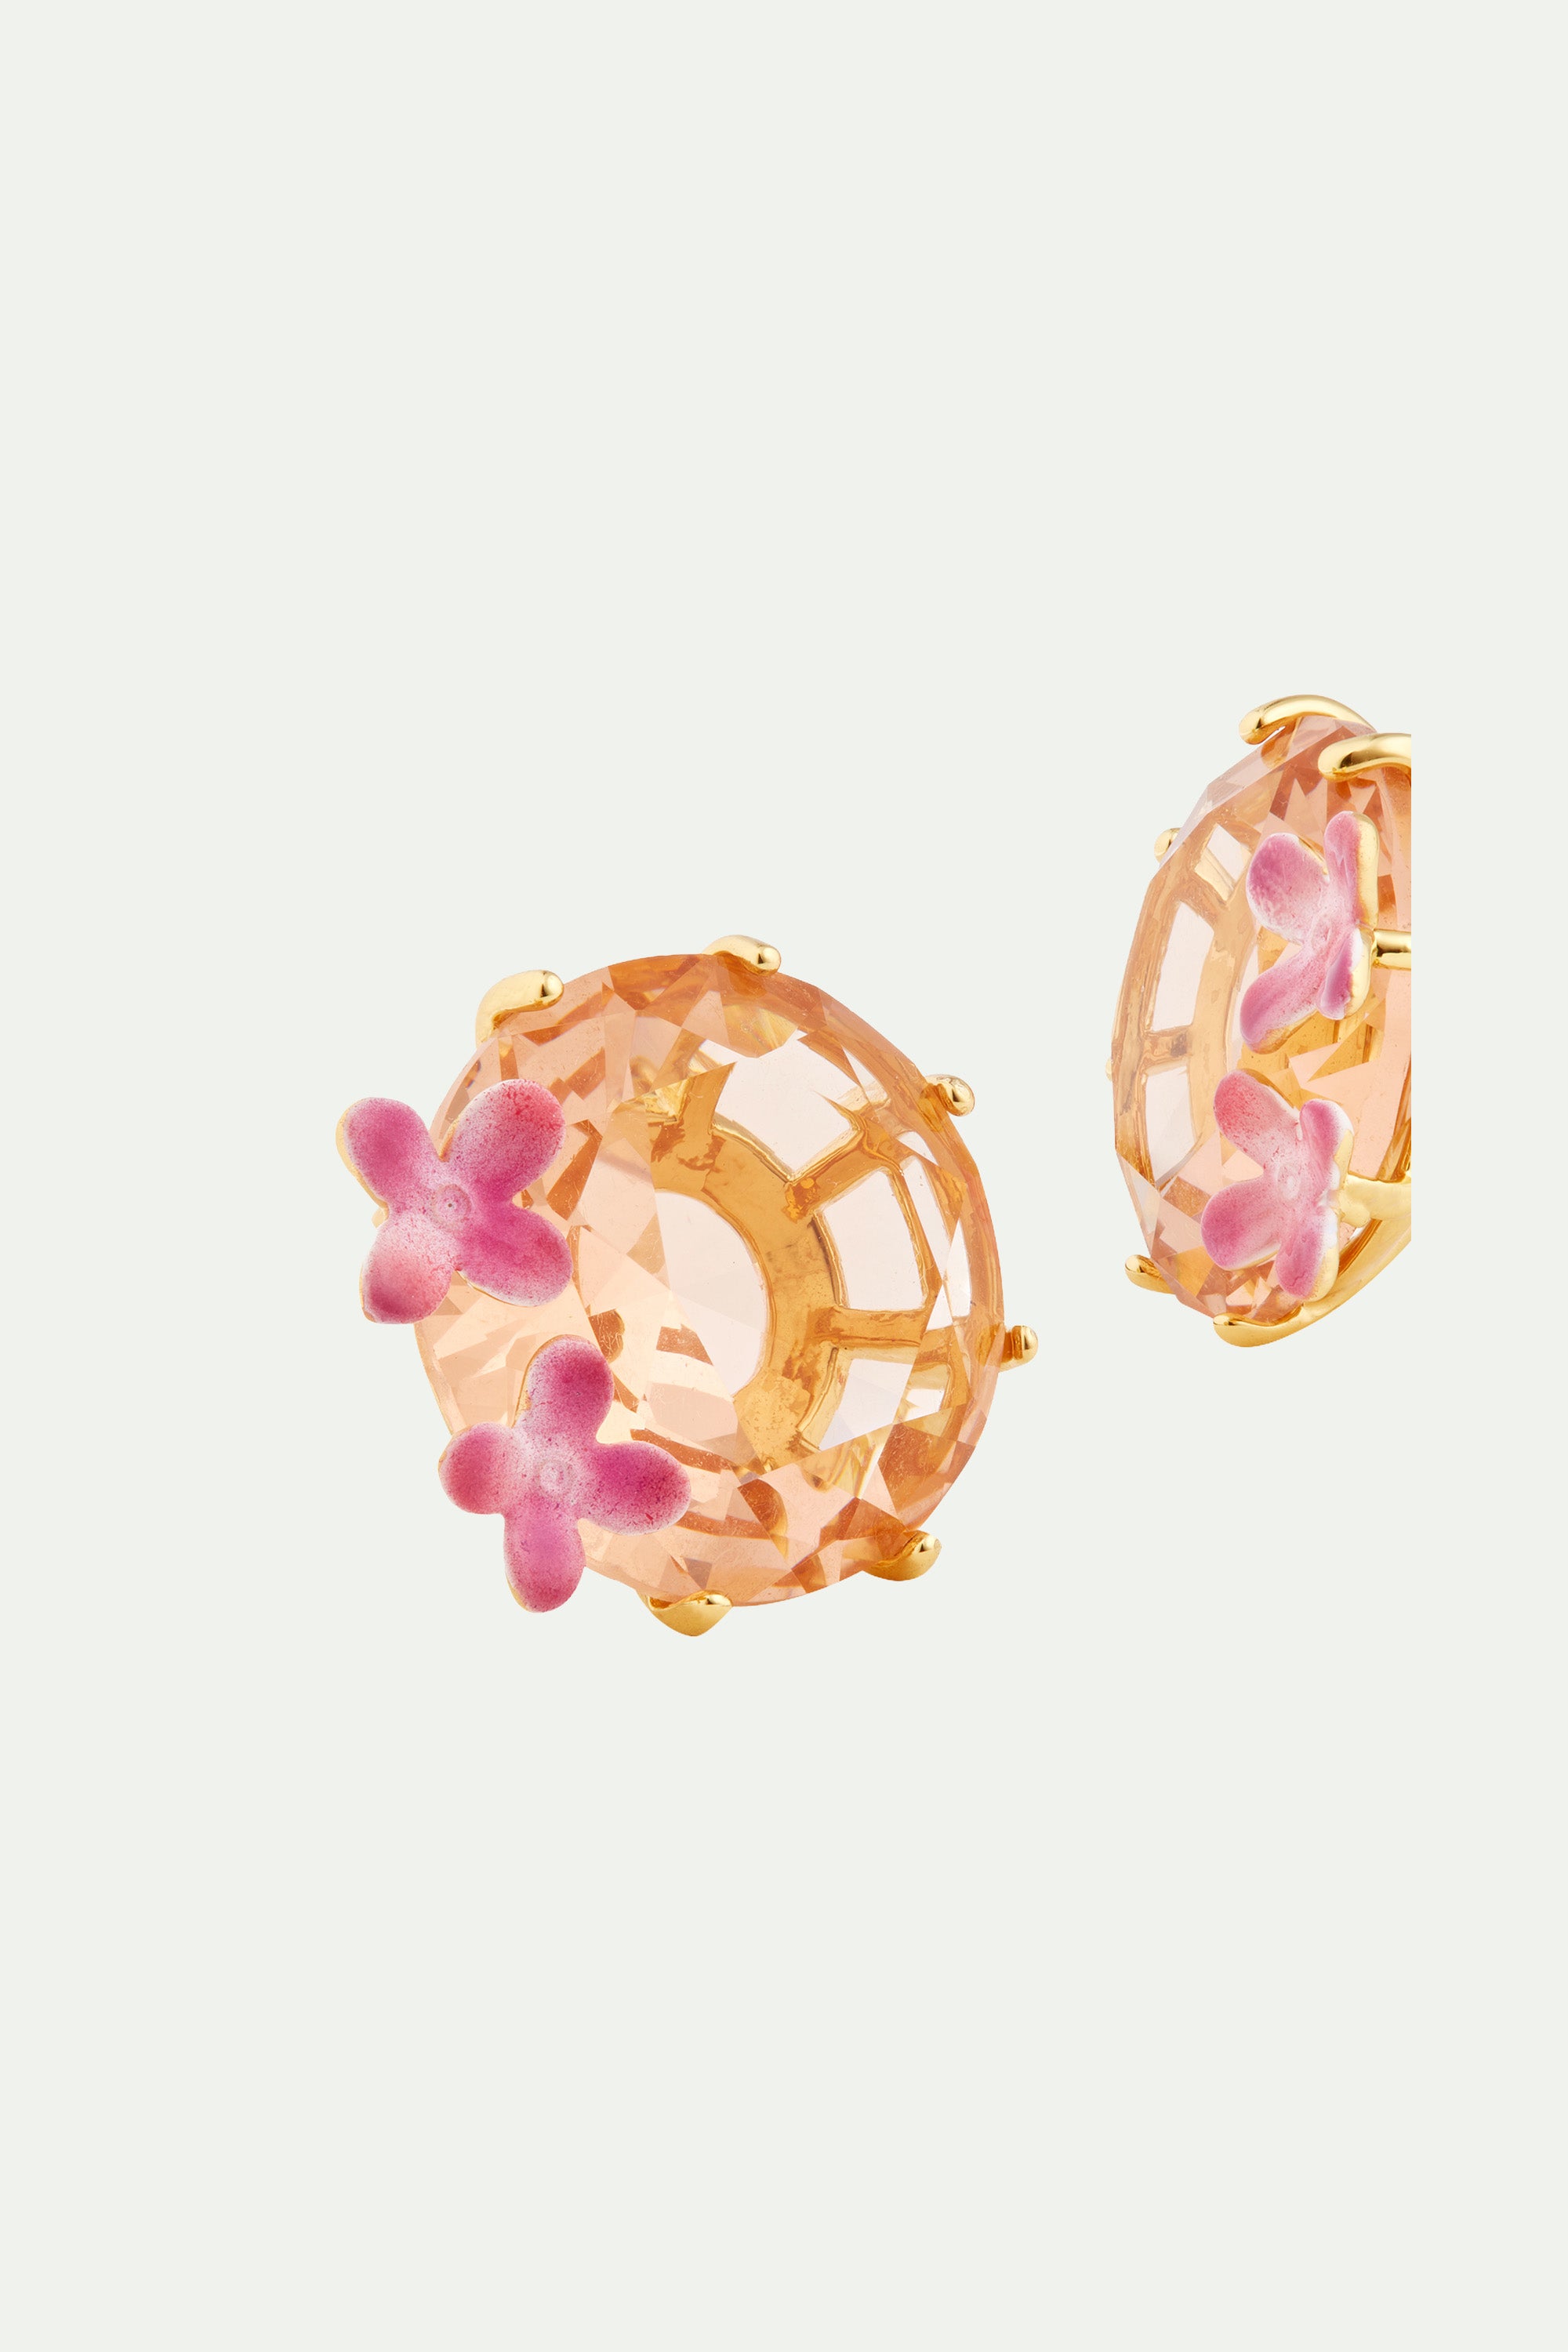 Apricot pink diamantine flower and round stone post earrings